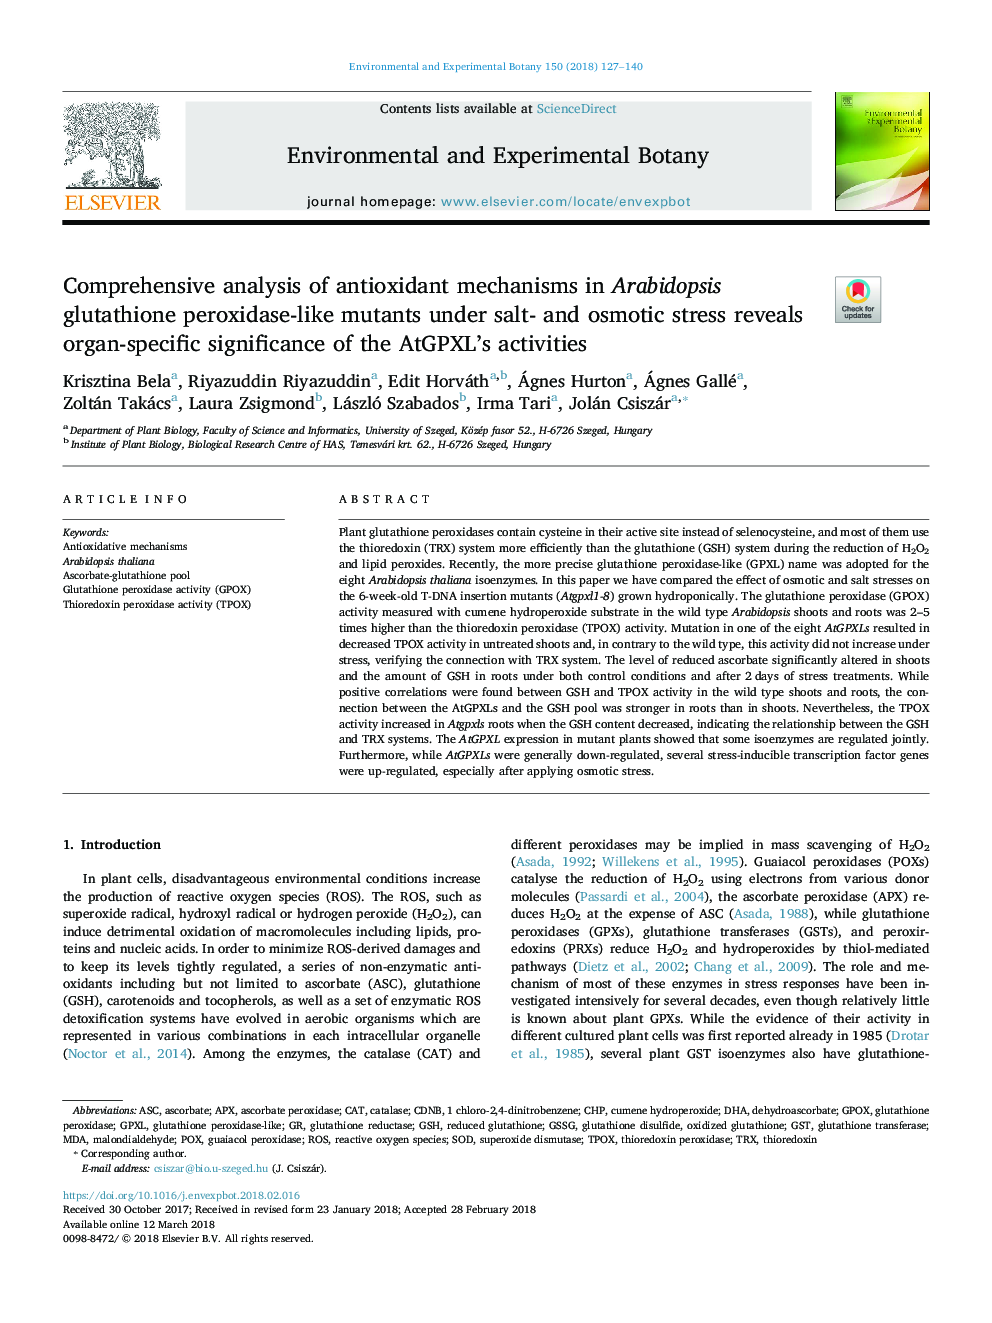 Comprehensive analysis of antioxidant mechanisms in Arabidopsis glutathione peroxidase-like mutants under salt- and osmotic stress reveals organ-specific significance of the AtGPXL's activities